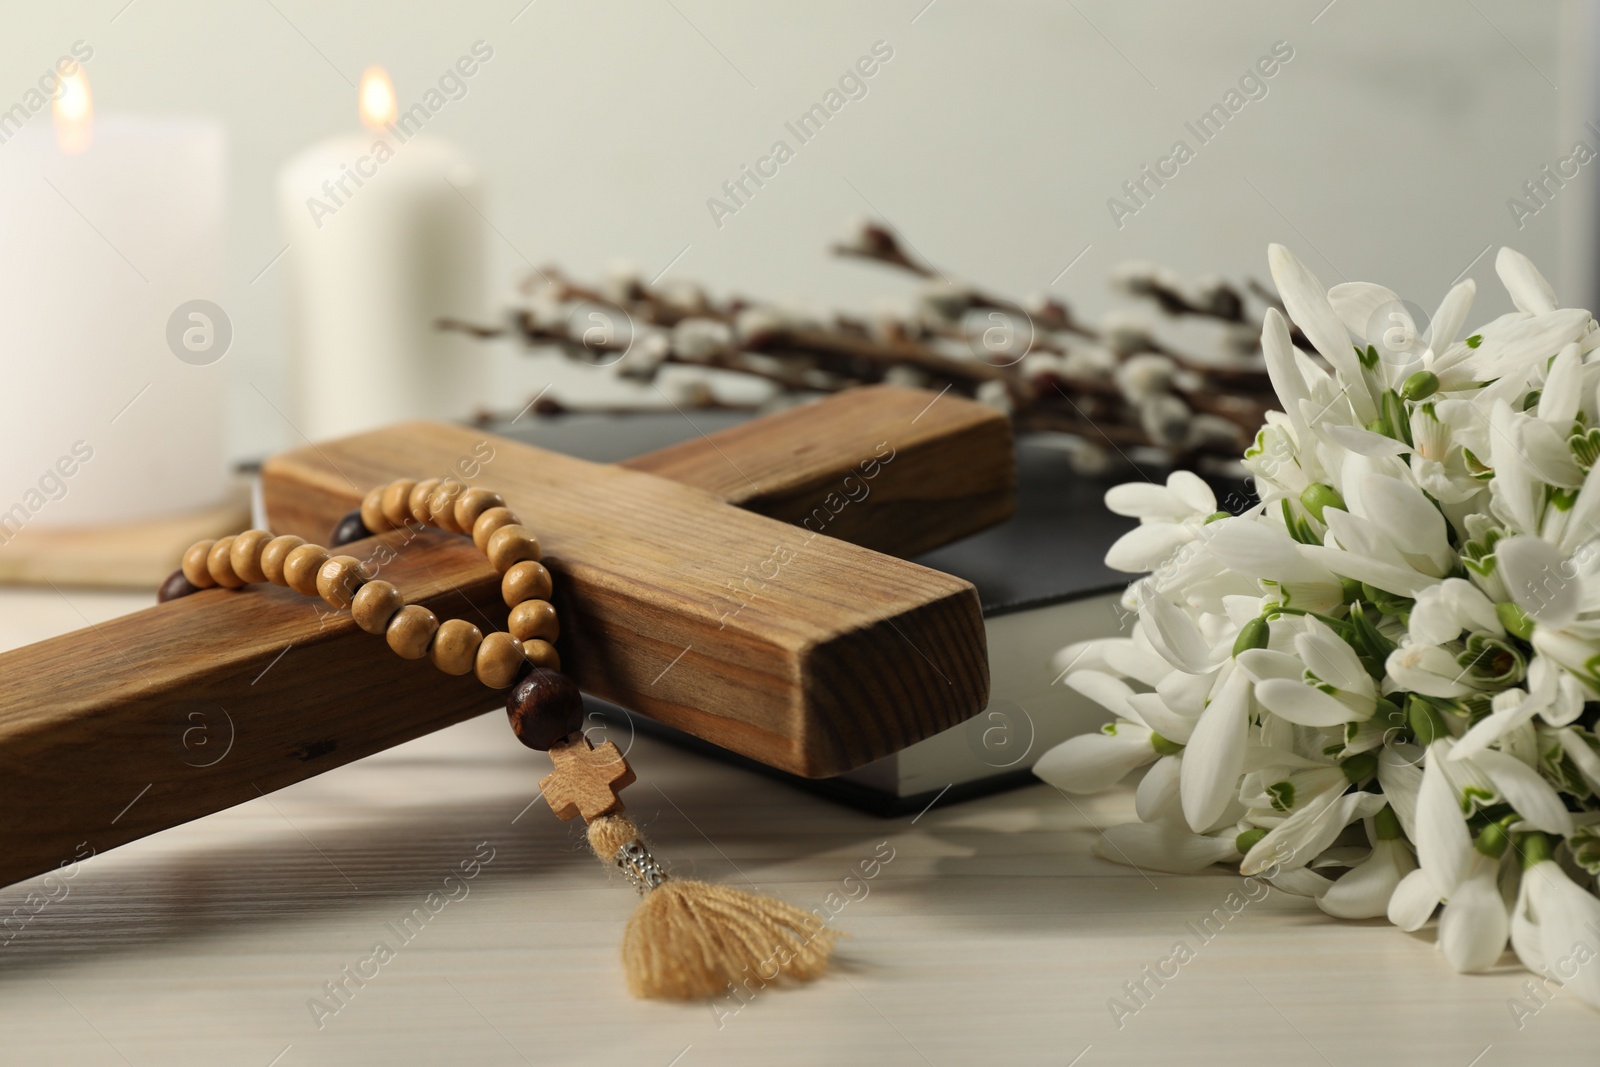 Photo of Wooden cross, rosary beads, Bible, church candles and snowdrops on white table, closeup